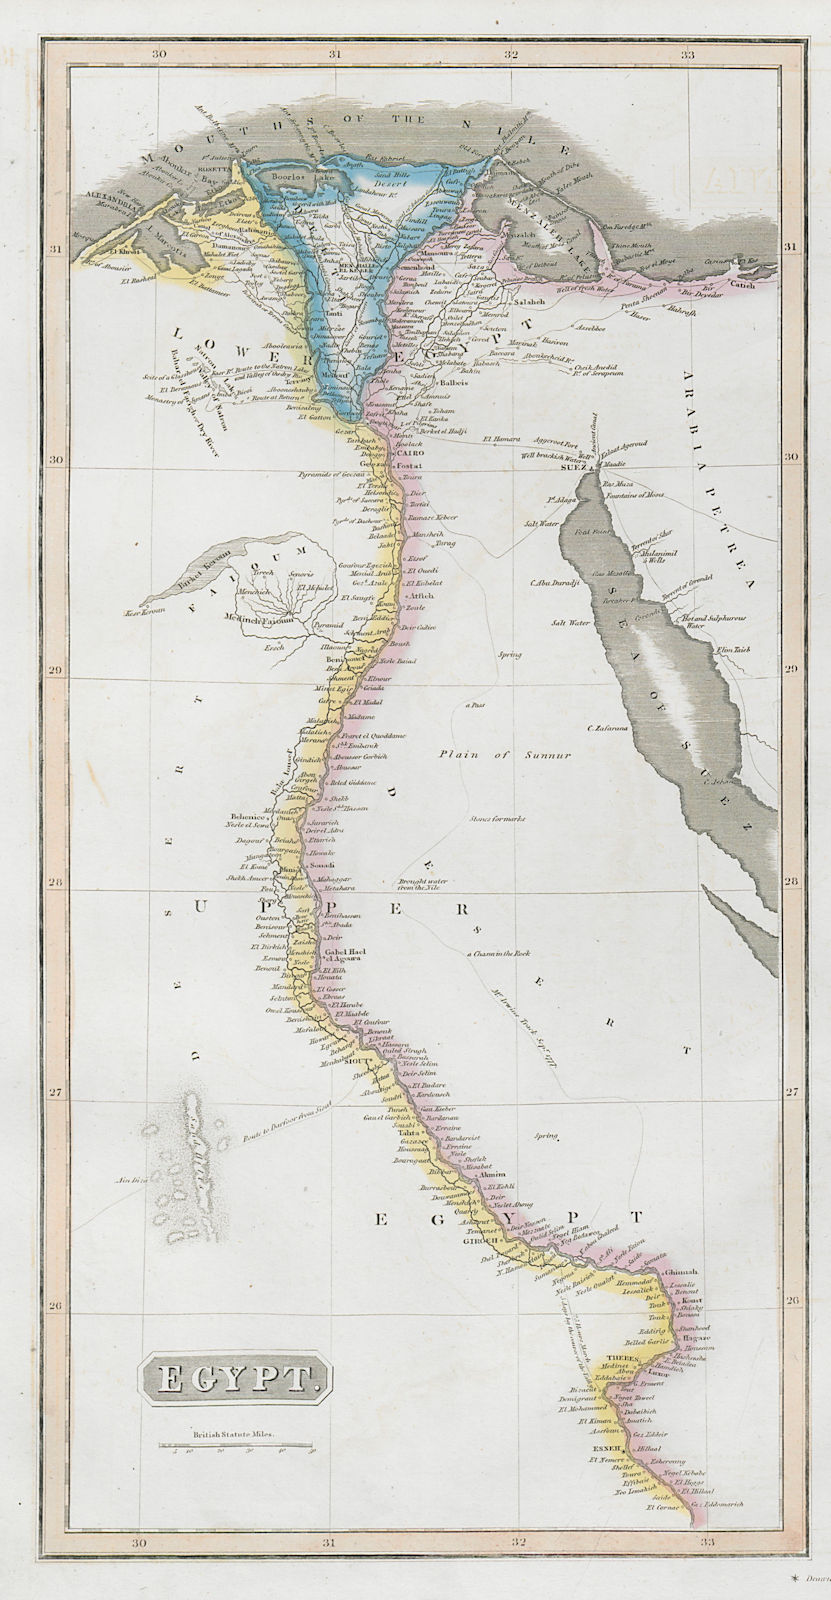 Egypt. Nile Valley. Eyles Irwin's 1777 route from India. THOMSON 1830 old map